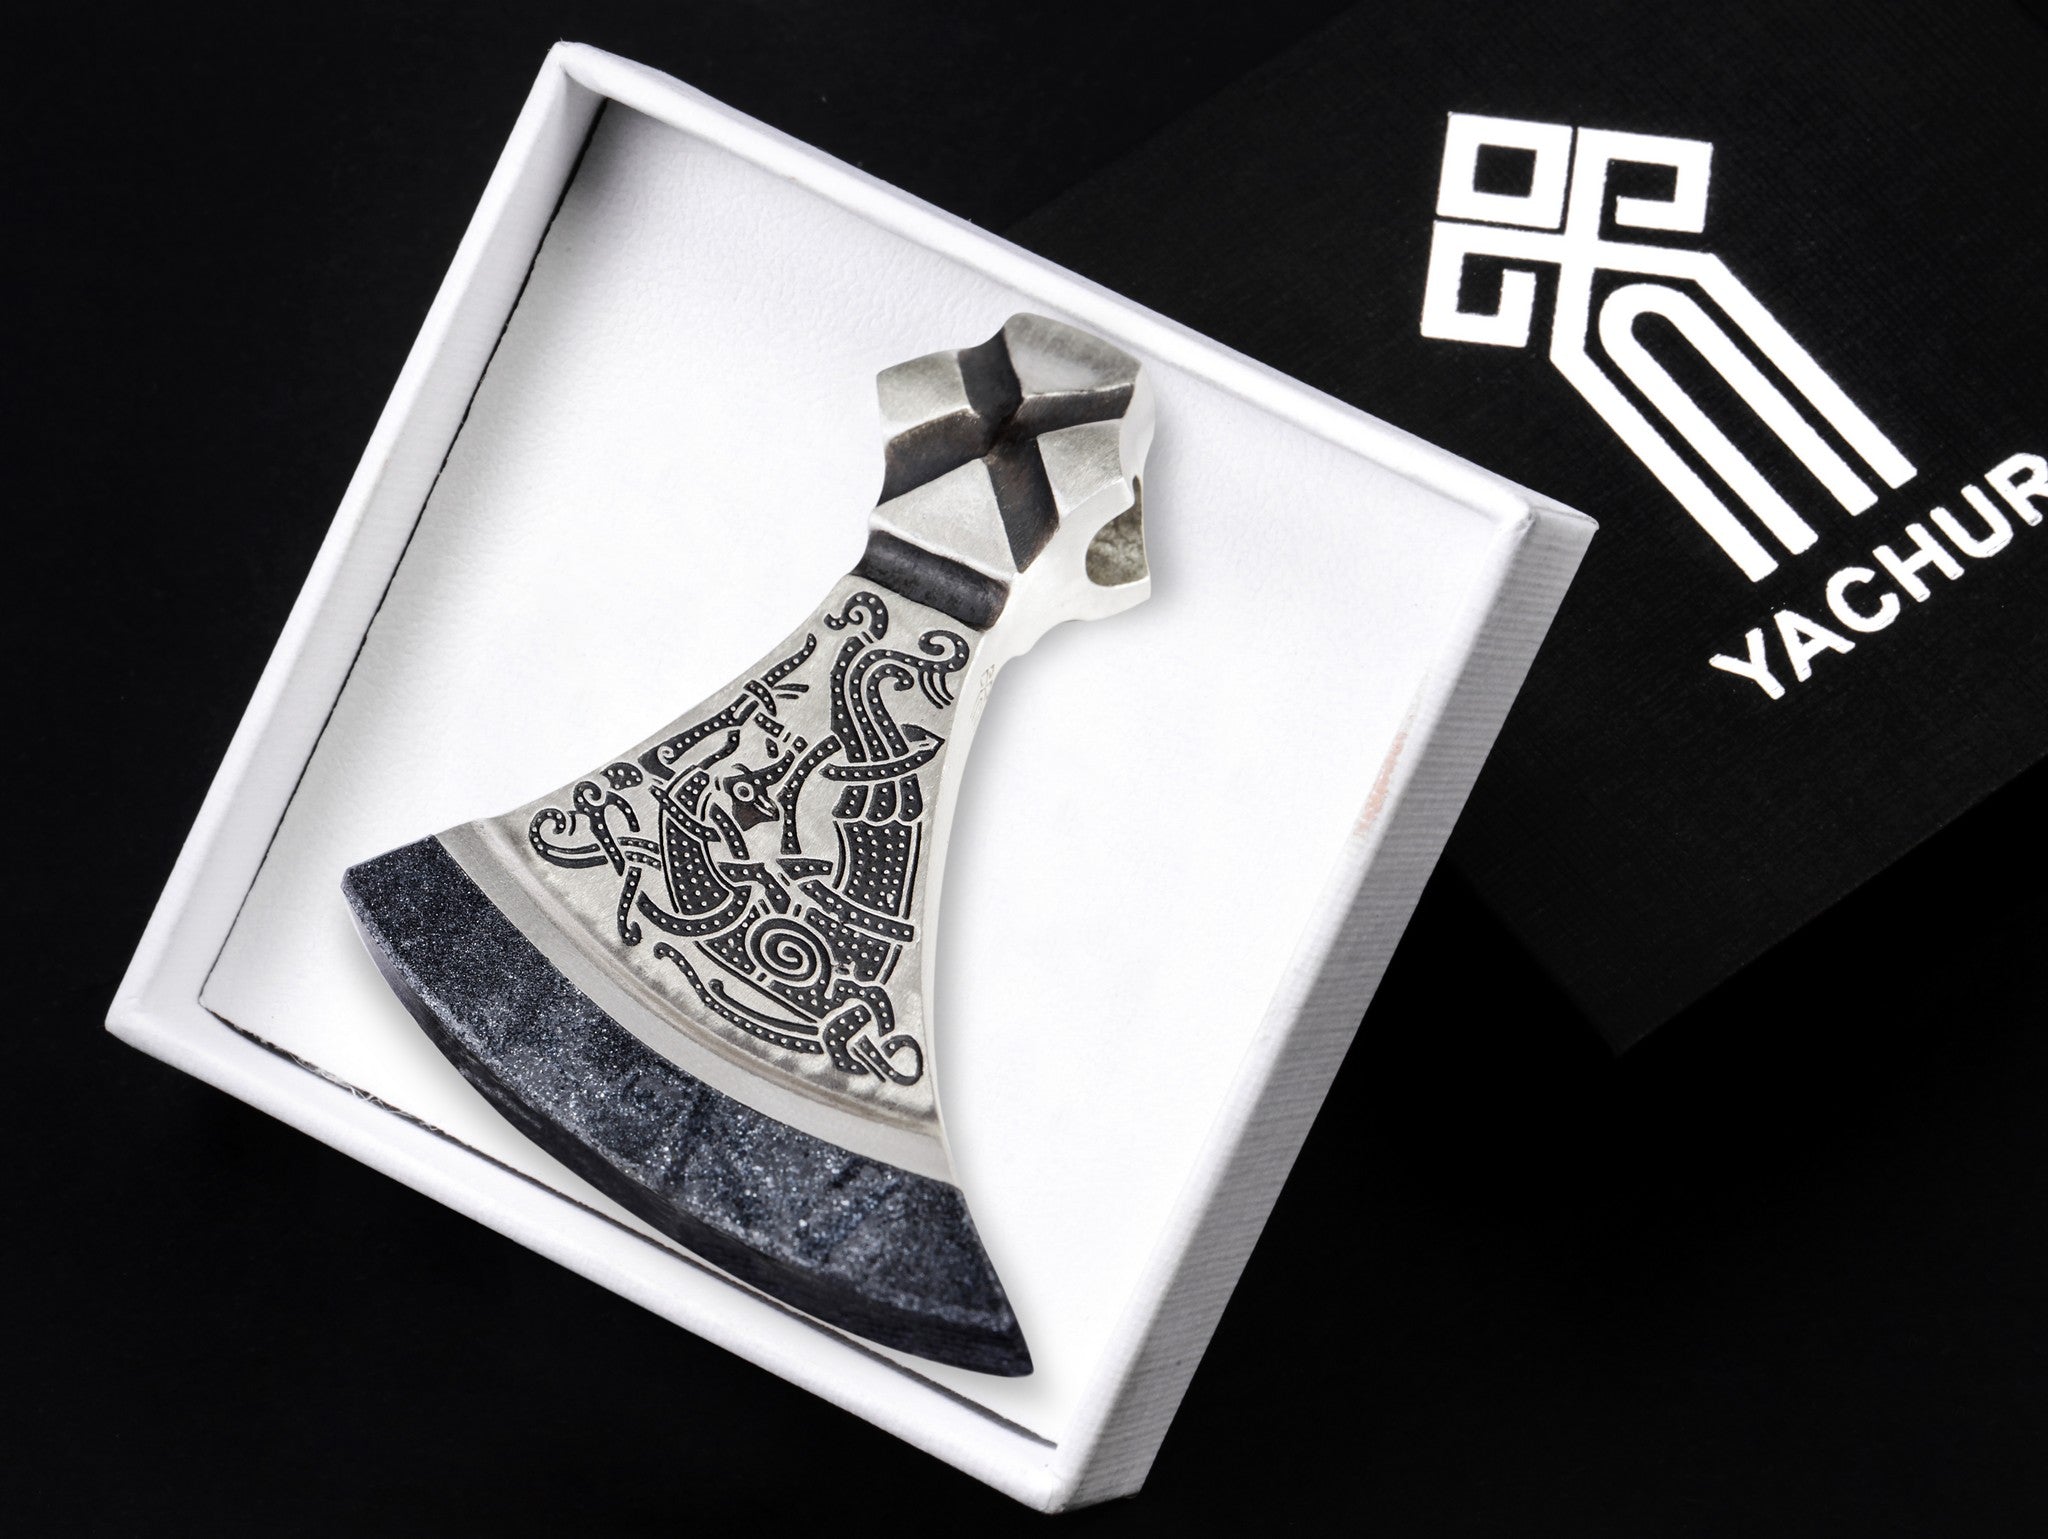 silver axe pendant in the branded 'Yachur' gift box